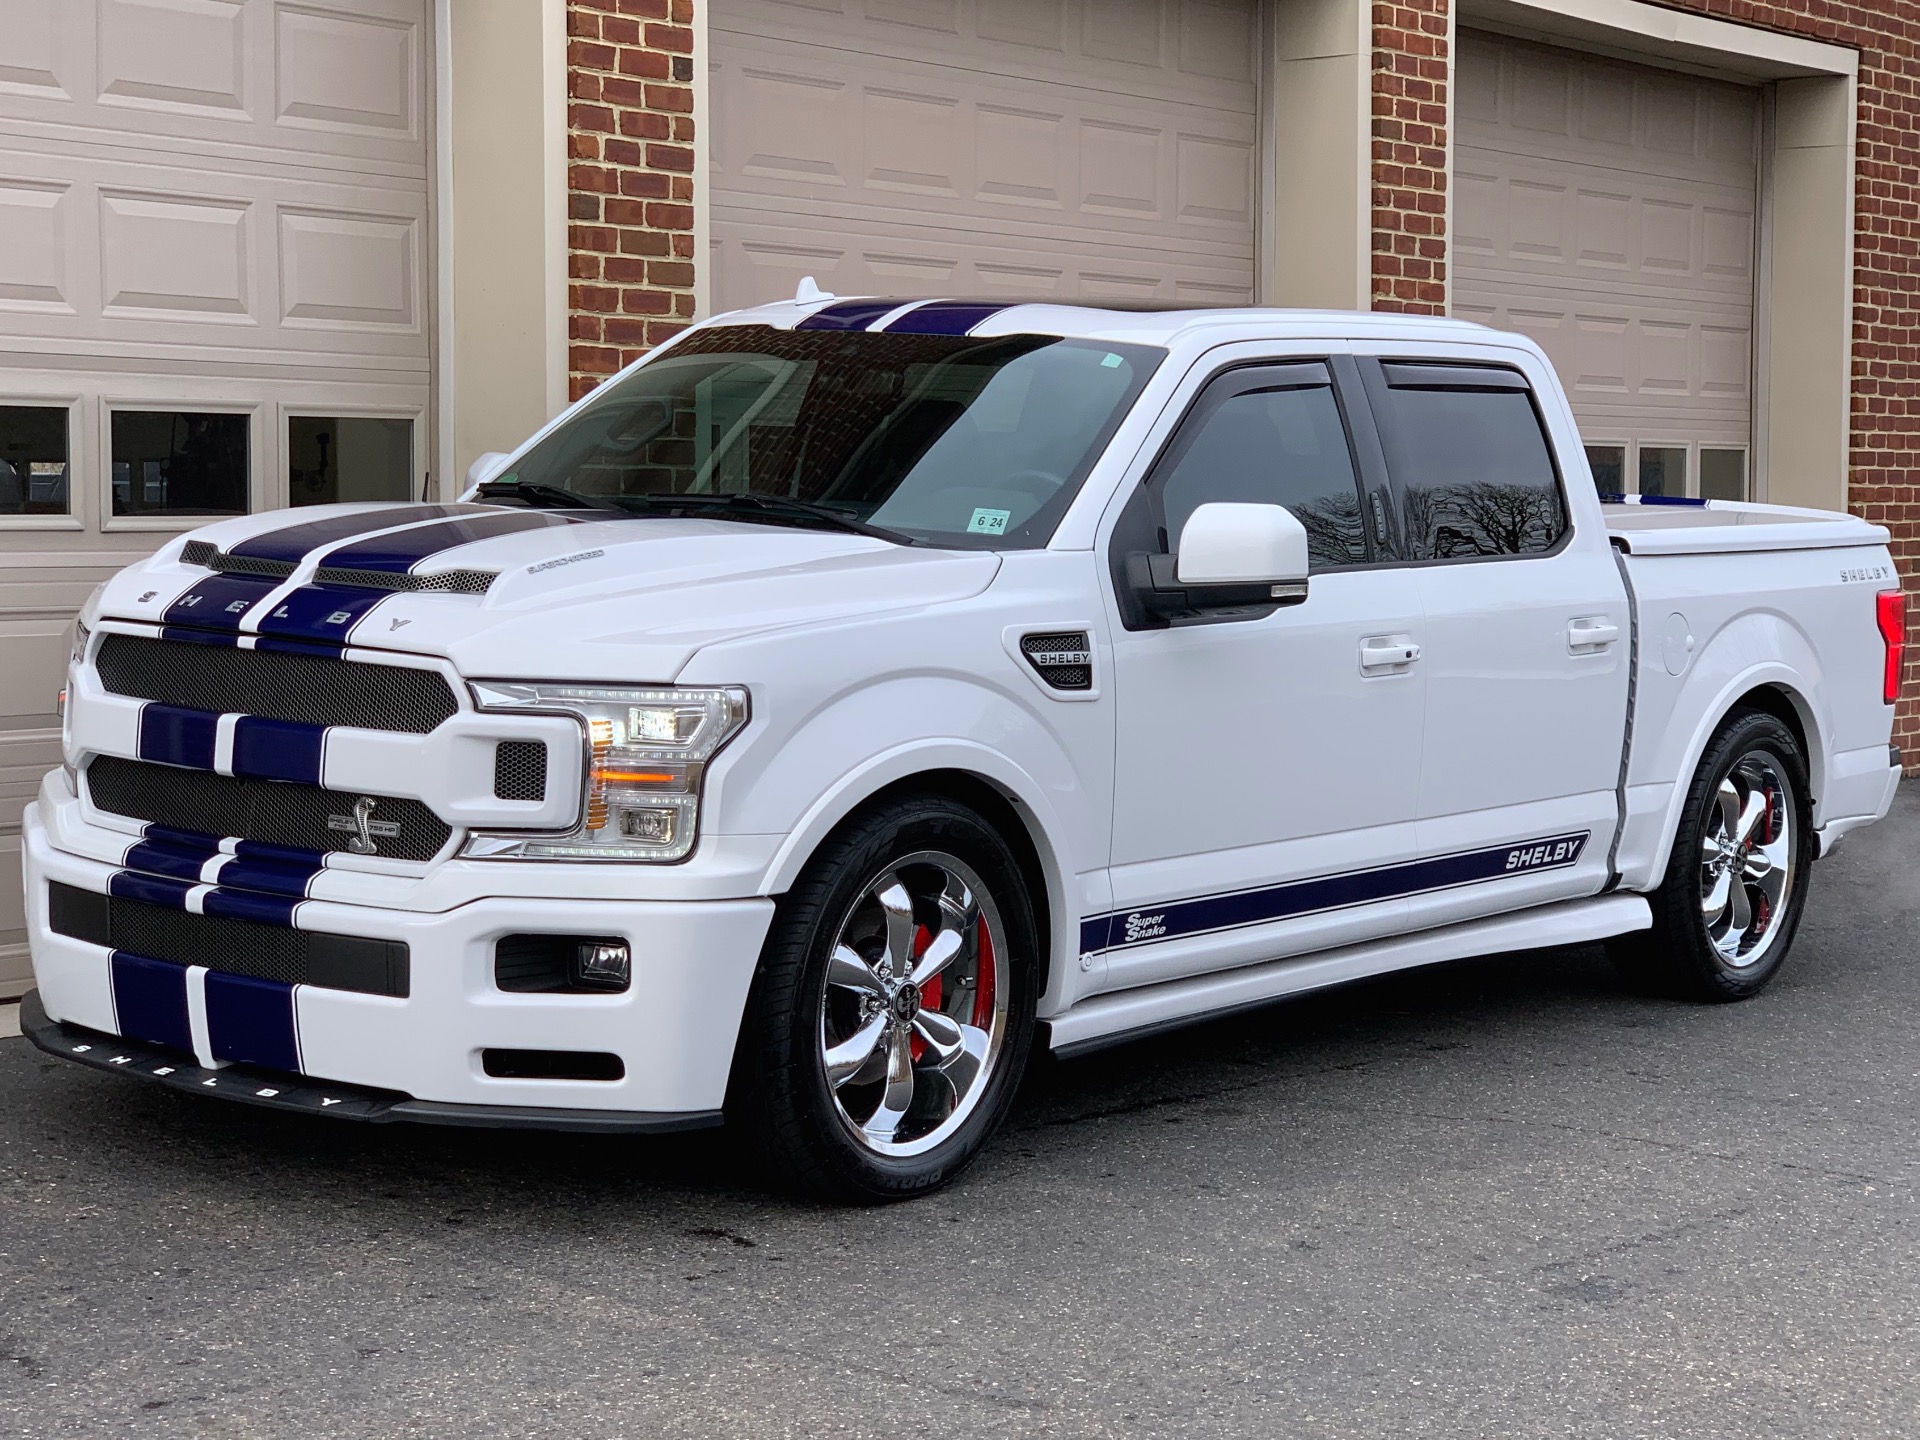 2018 Ford F-150 SHELBY SUPER SNAKE Stock # D61575 for sale near